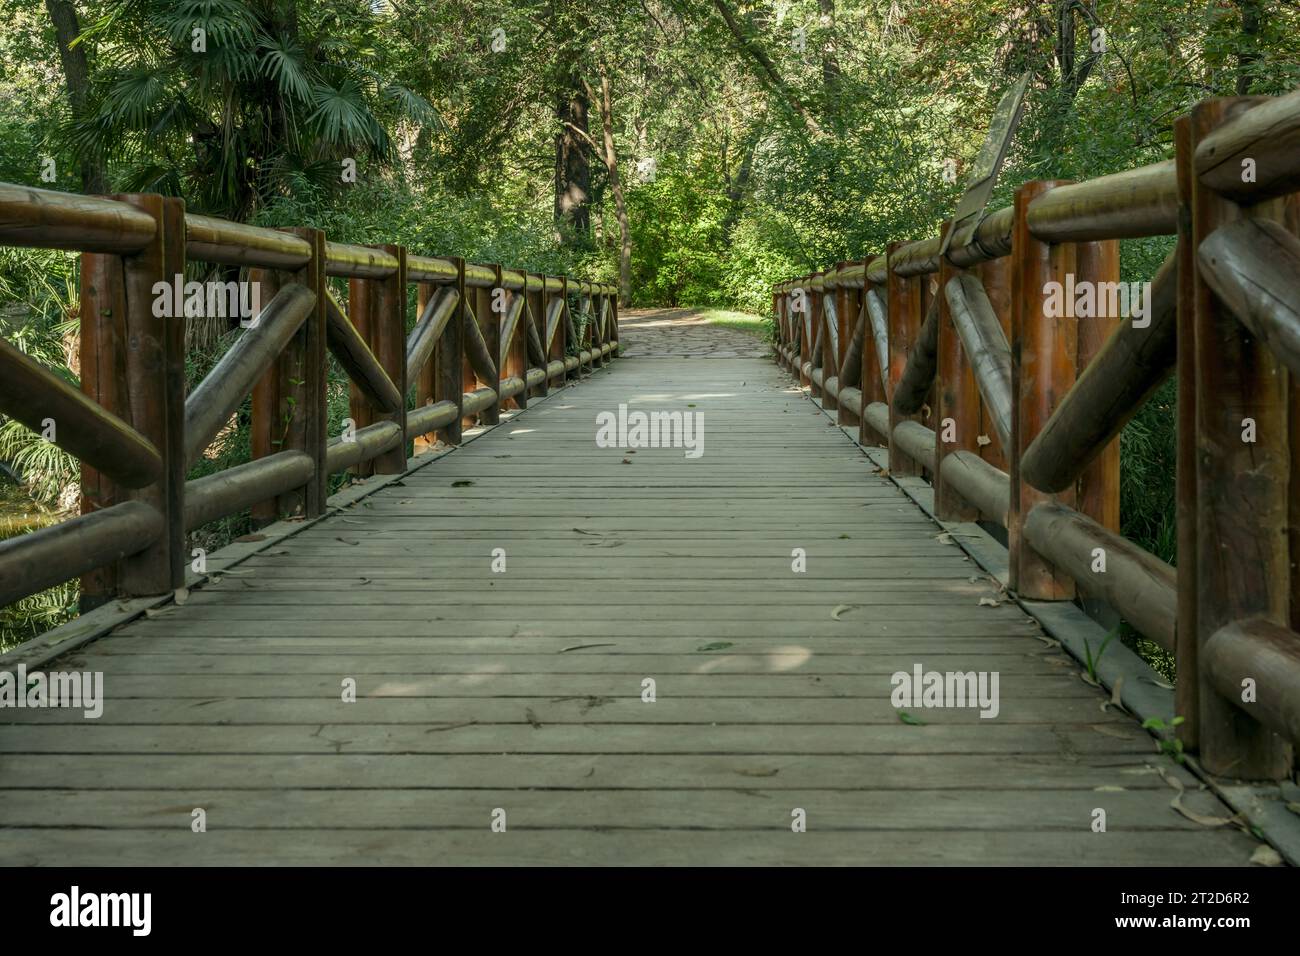 A bridge with railings made of wooden logs, planks in a park with lots of trees Stock Photo